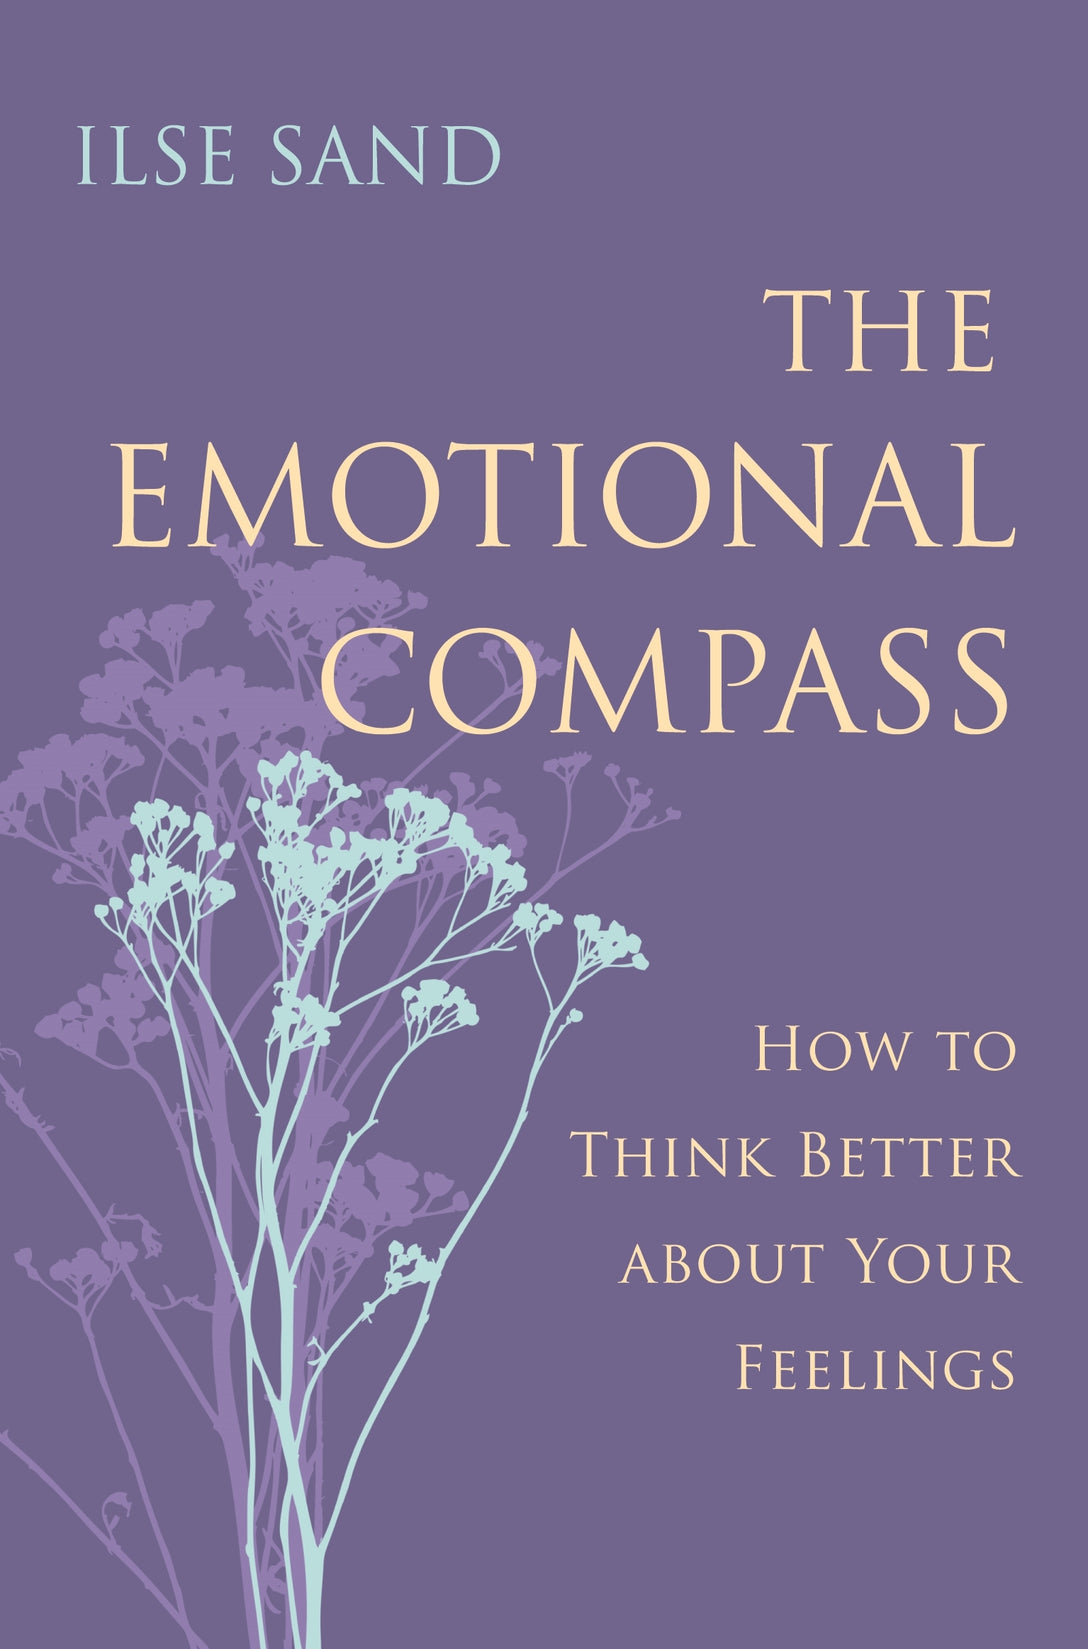 The Emotional Compass by Ilse Sand